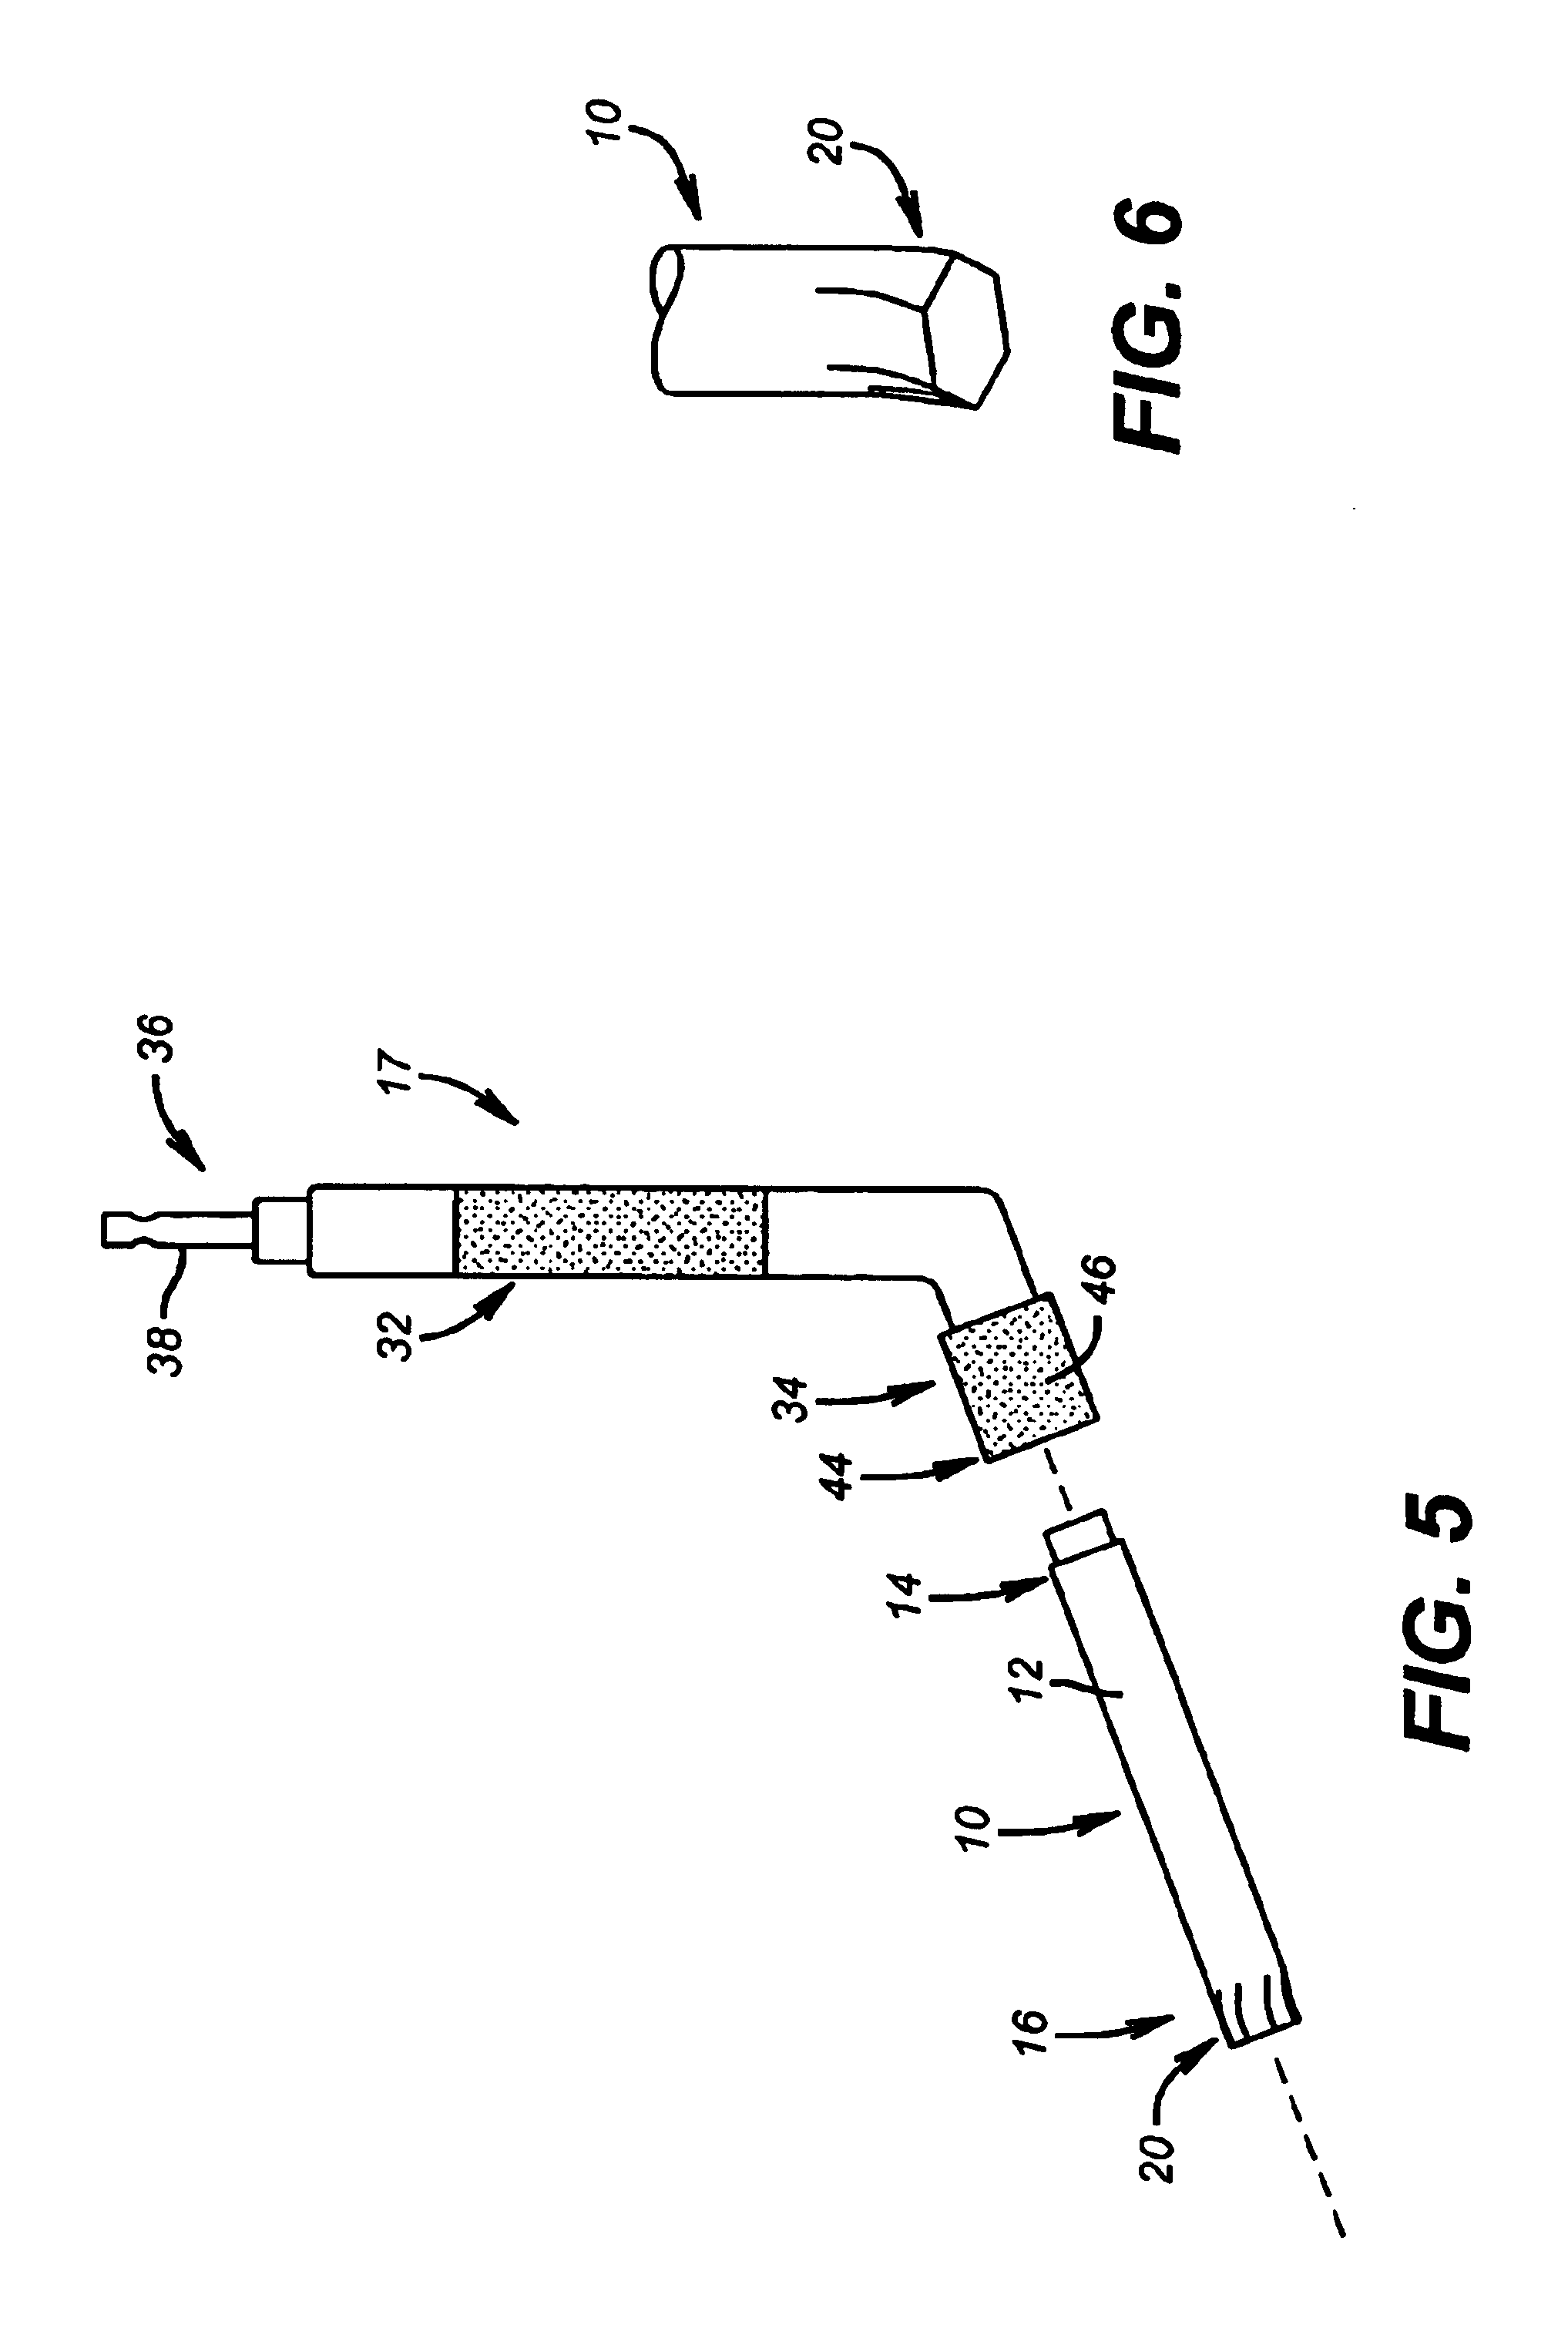 Elongated driving bit attachable to a driving instrument and method of use for minimally invasive hip surgery